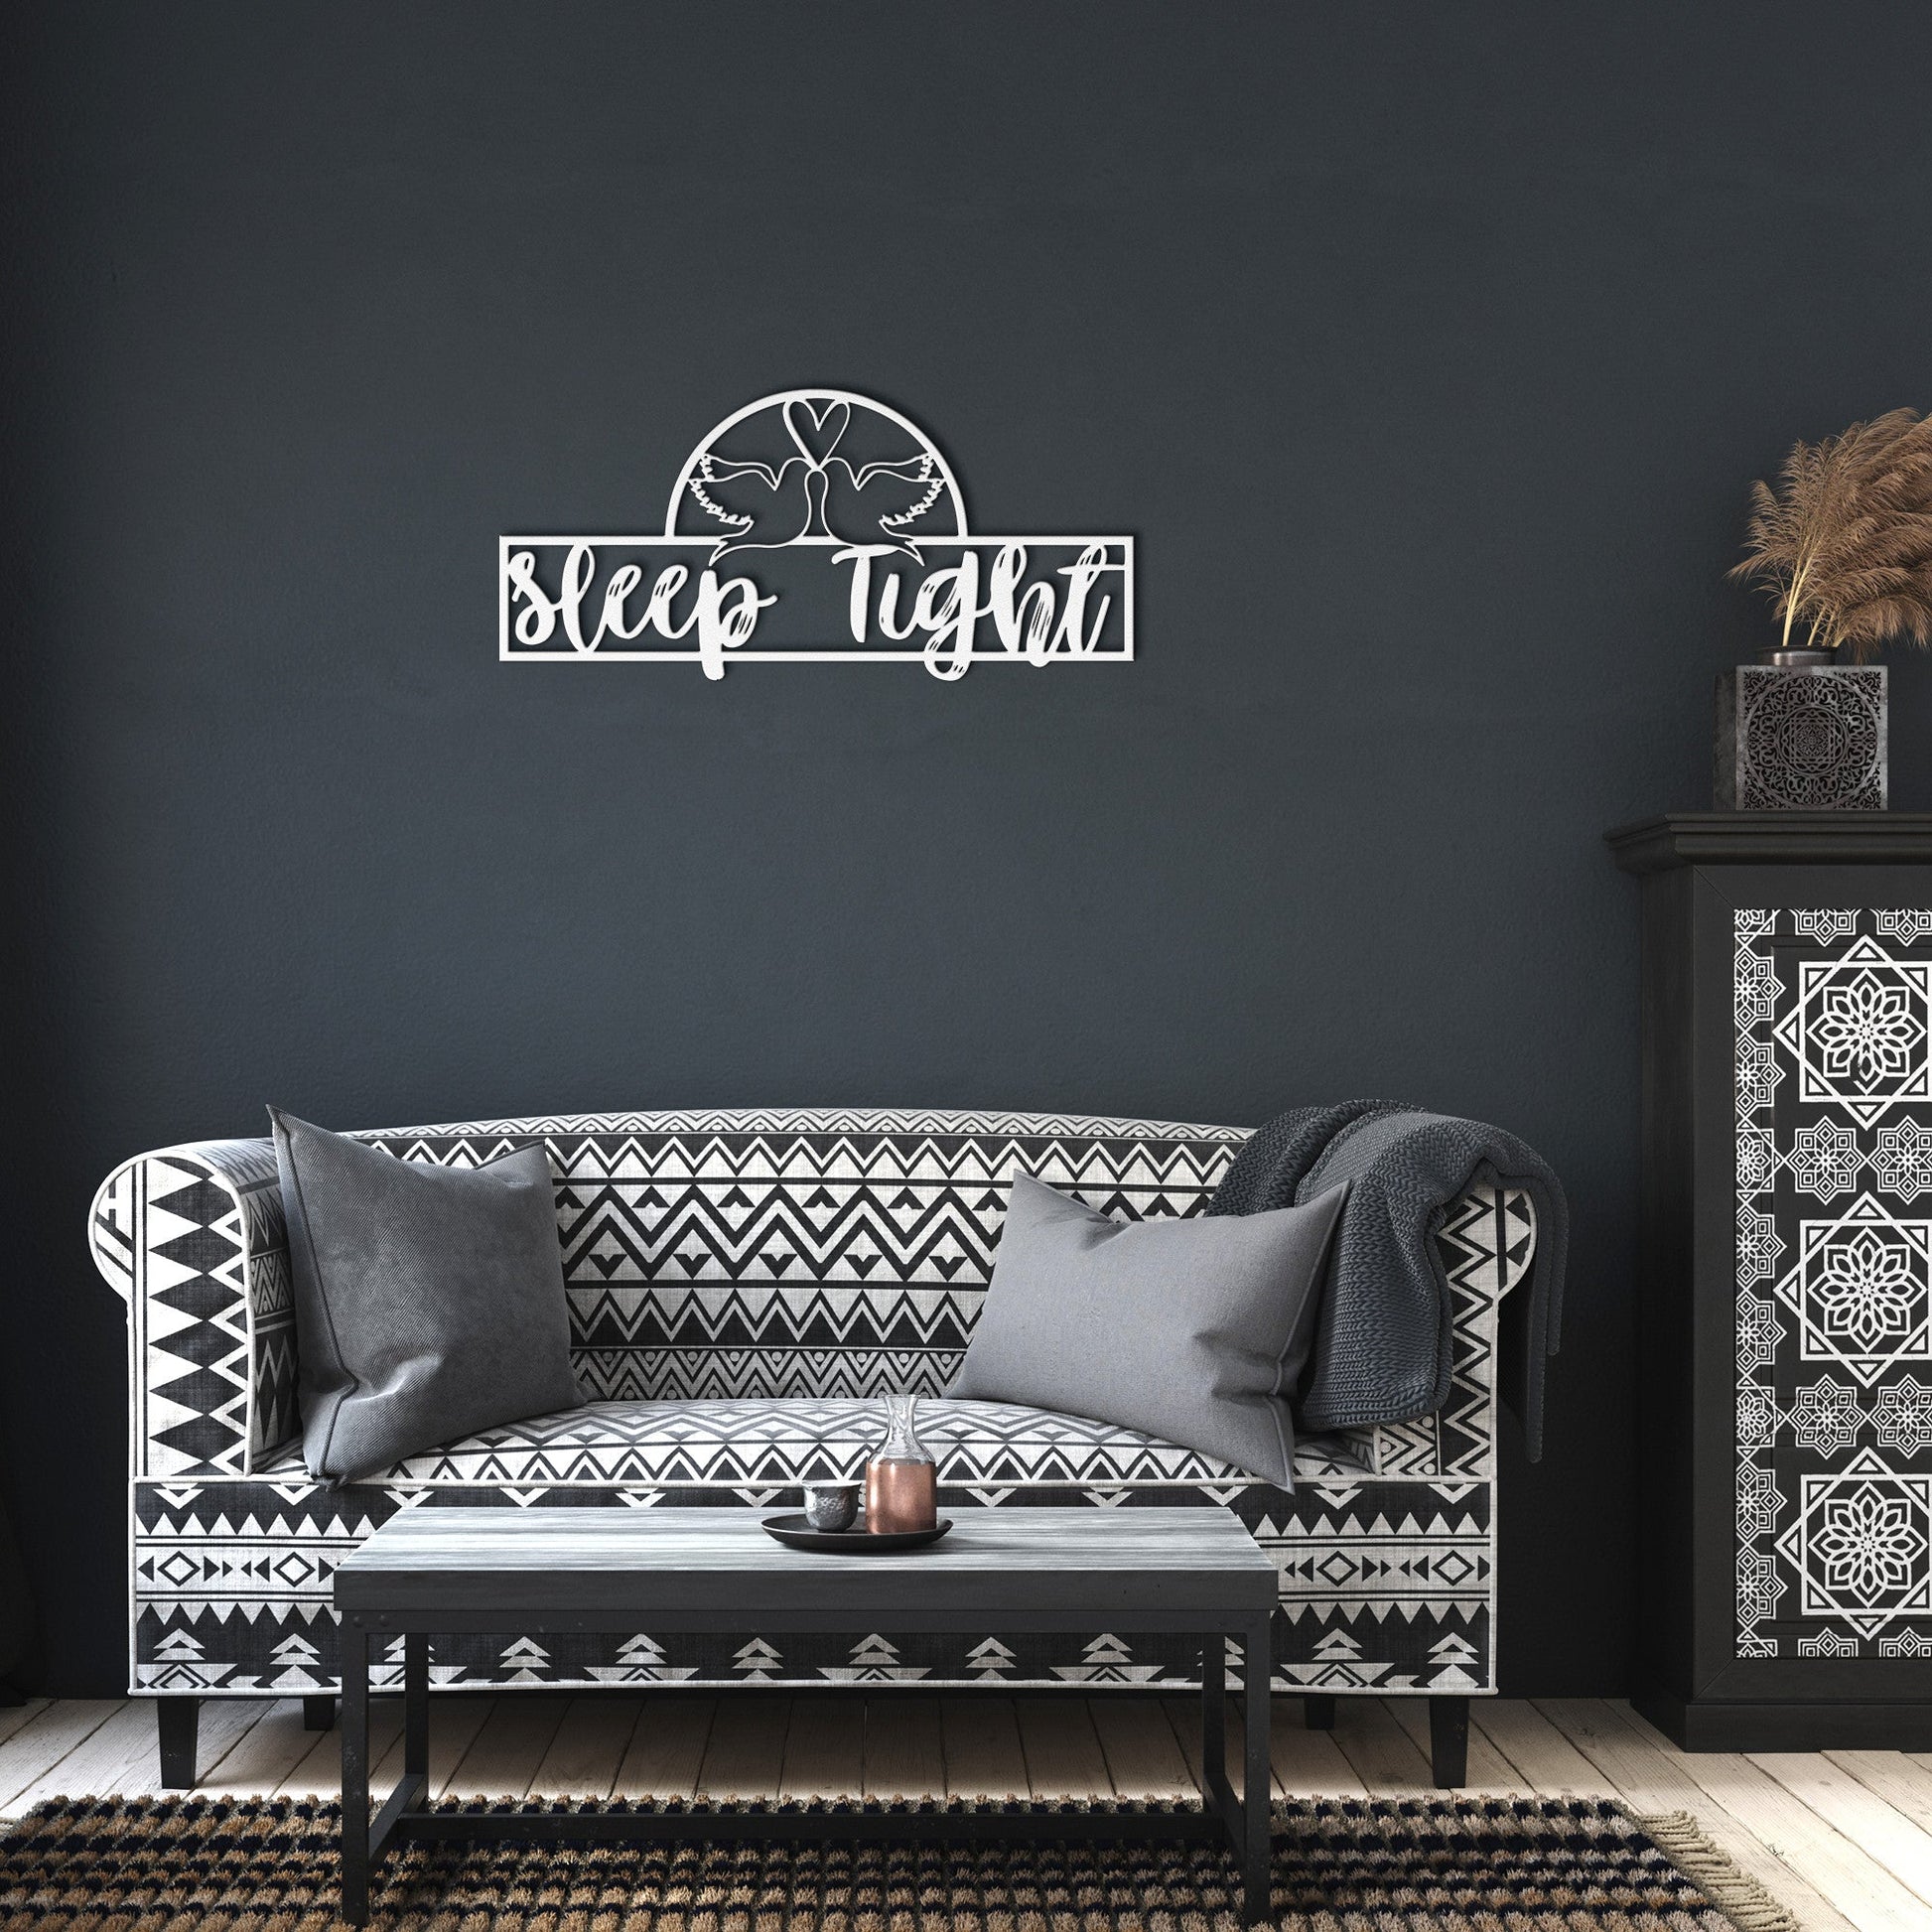 Sleep Tight Metal Sign: Beautiful Above Bed Art for Serene Nights - Stylinsoul